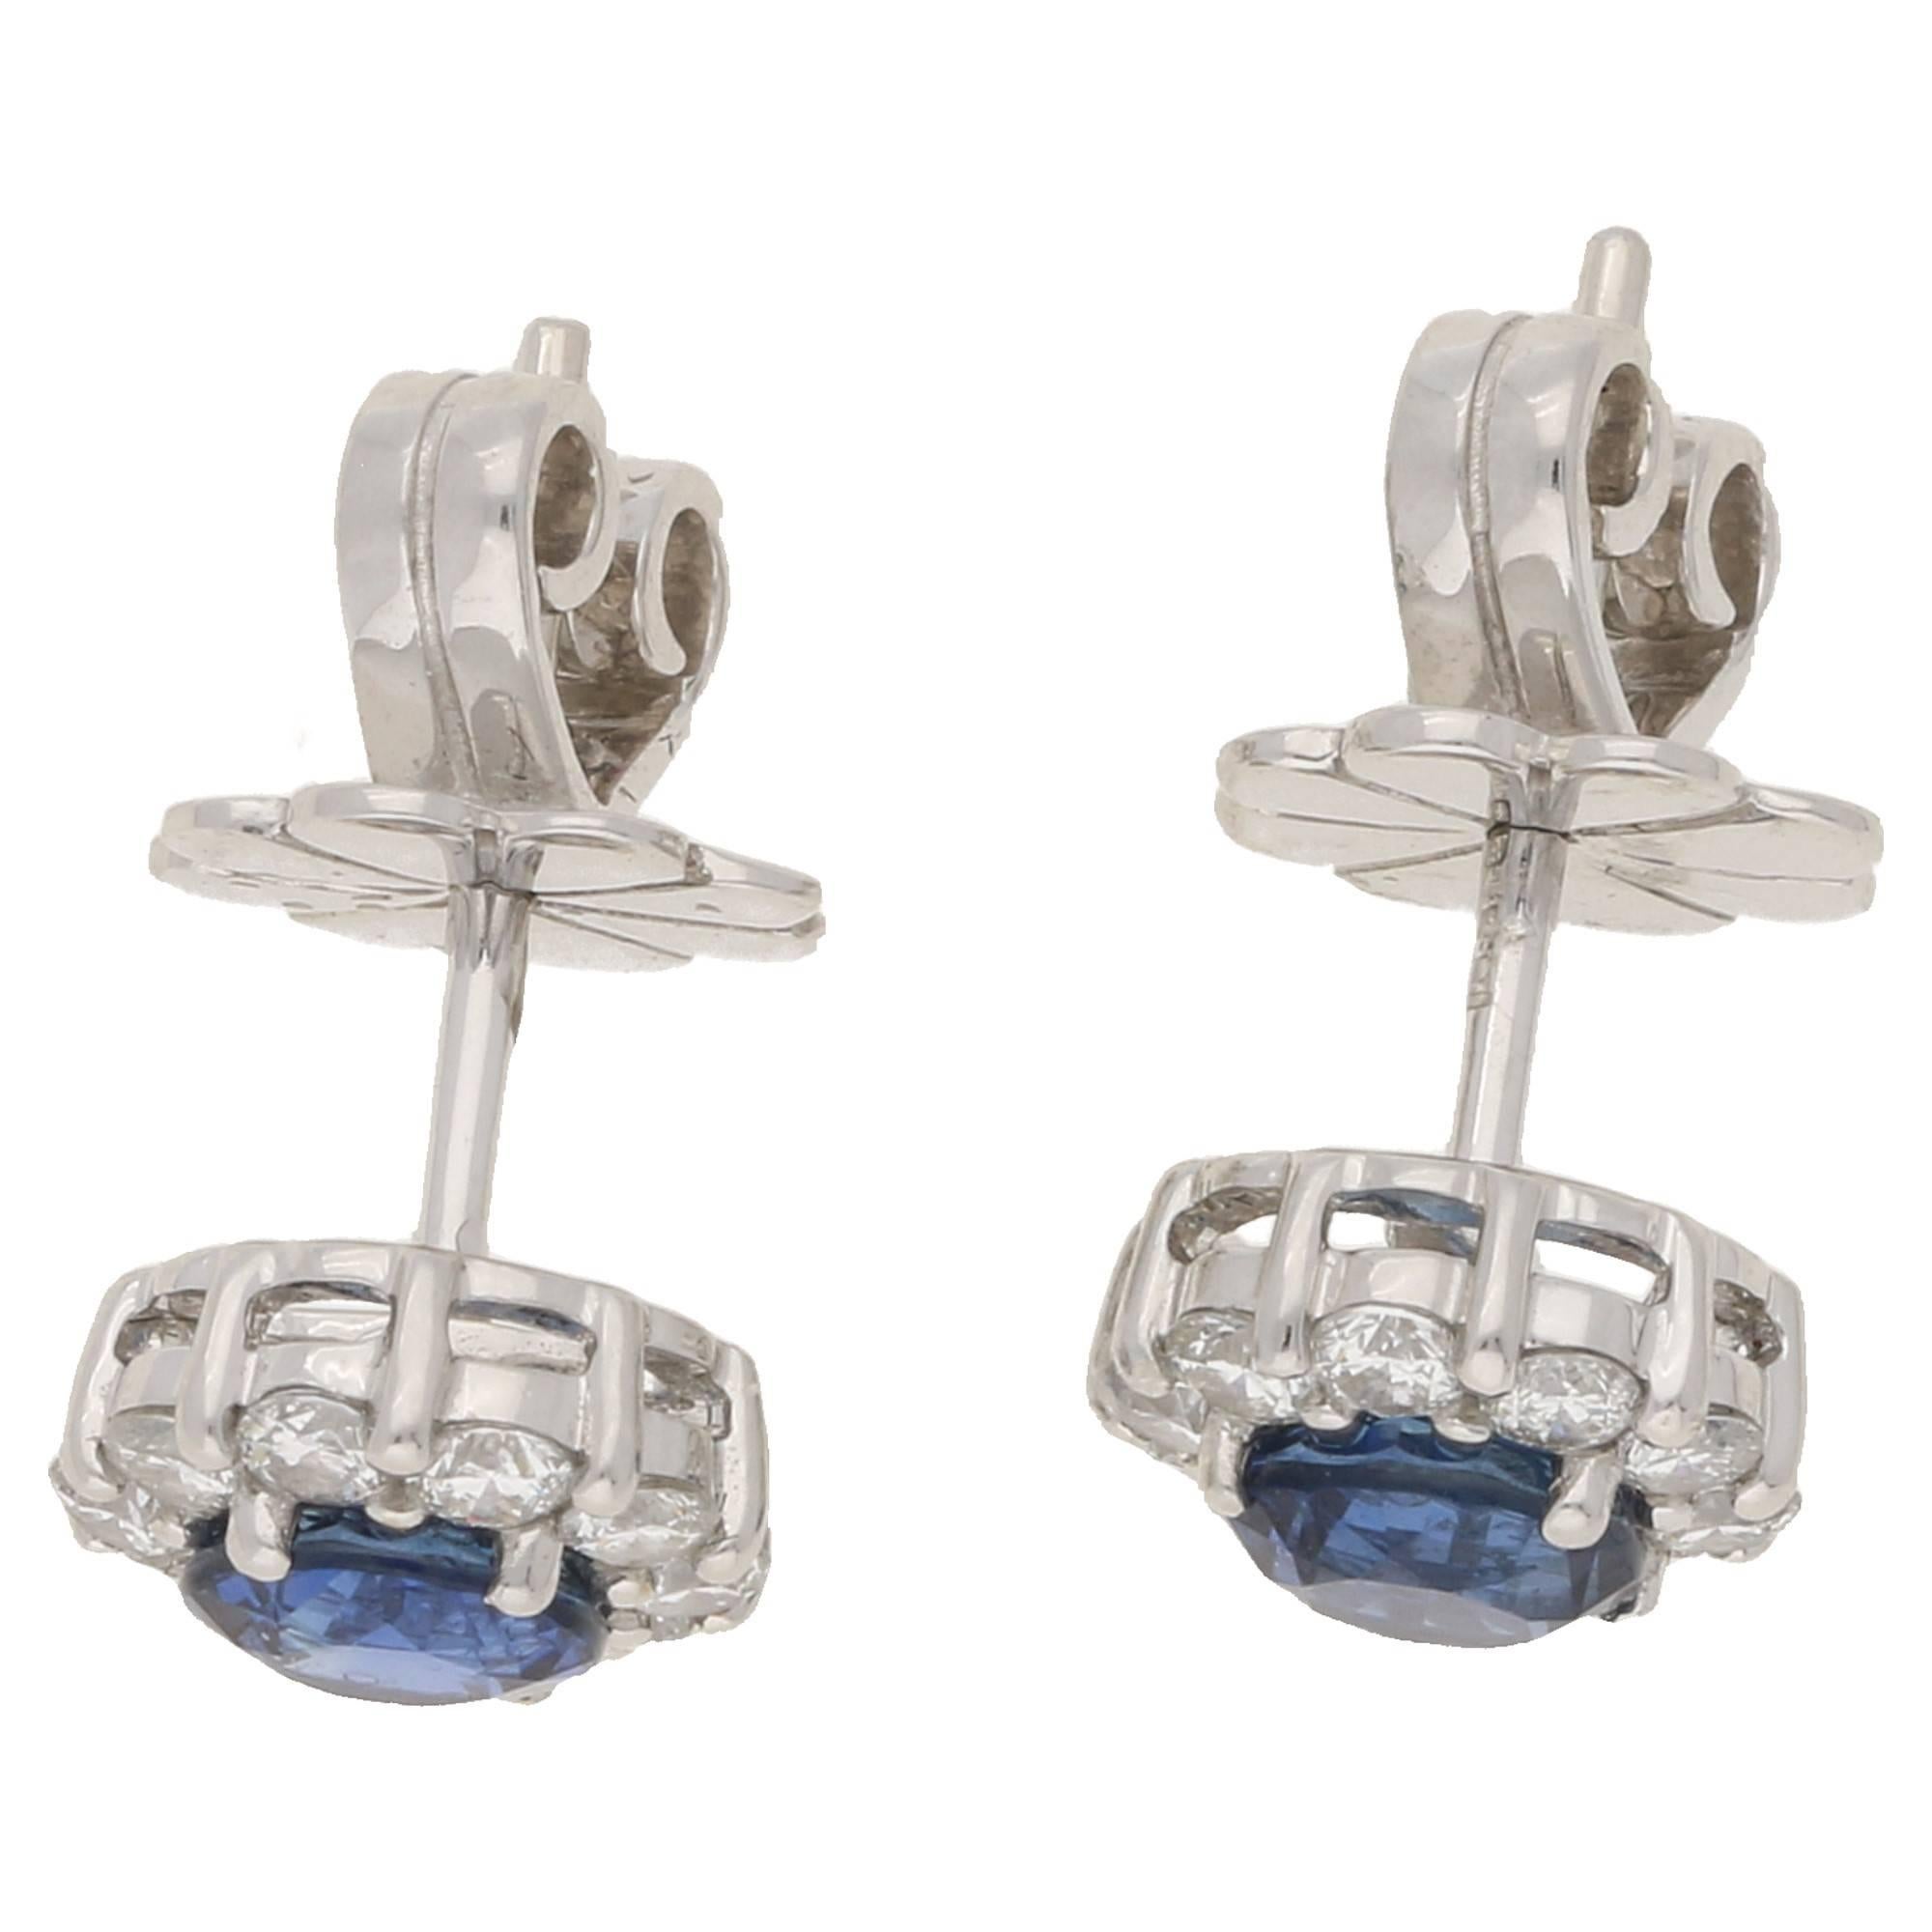 A fine pair of cluster earrings, set with central blue sapphires measuring 1.09cts total. The surrounding round brilliant cut diamonds total 0.76cts G/H colour and VS clarity, in a simple claw setting in 18k white gold. On post and butterfly